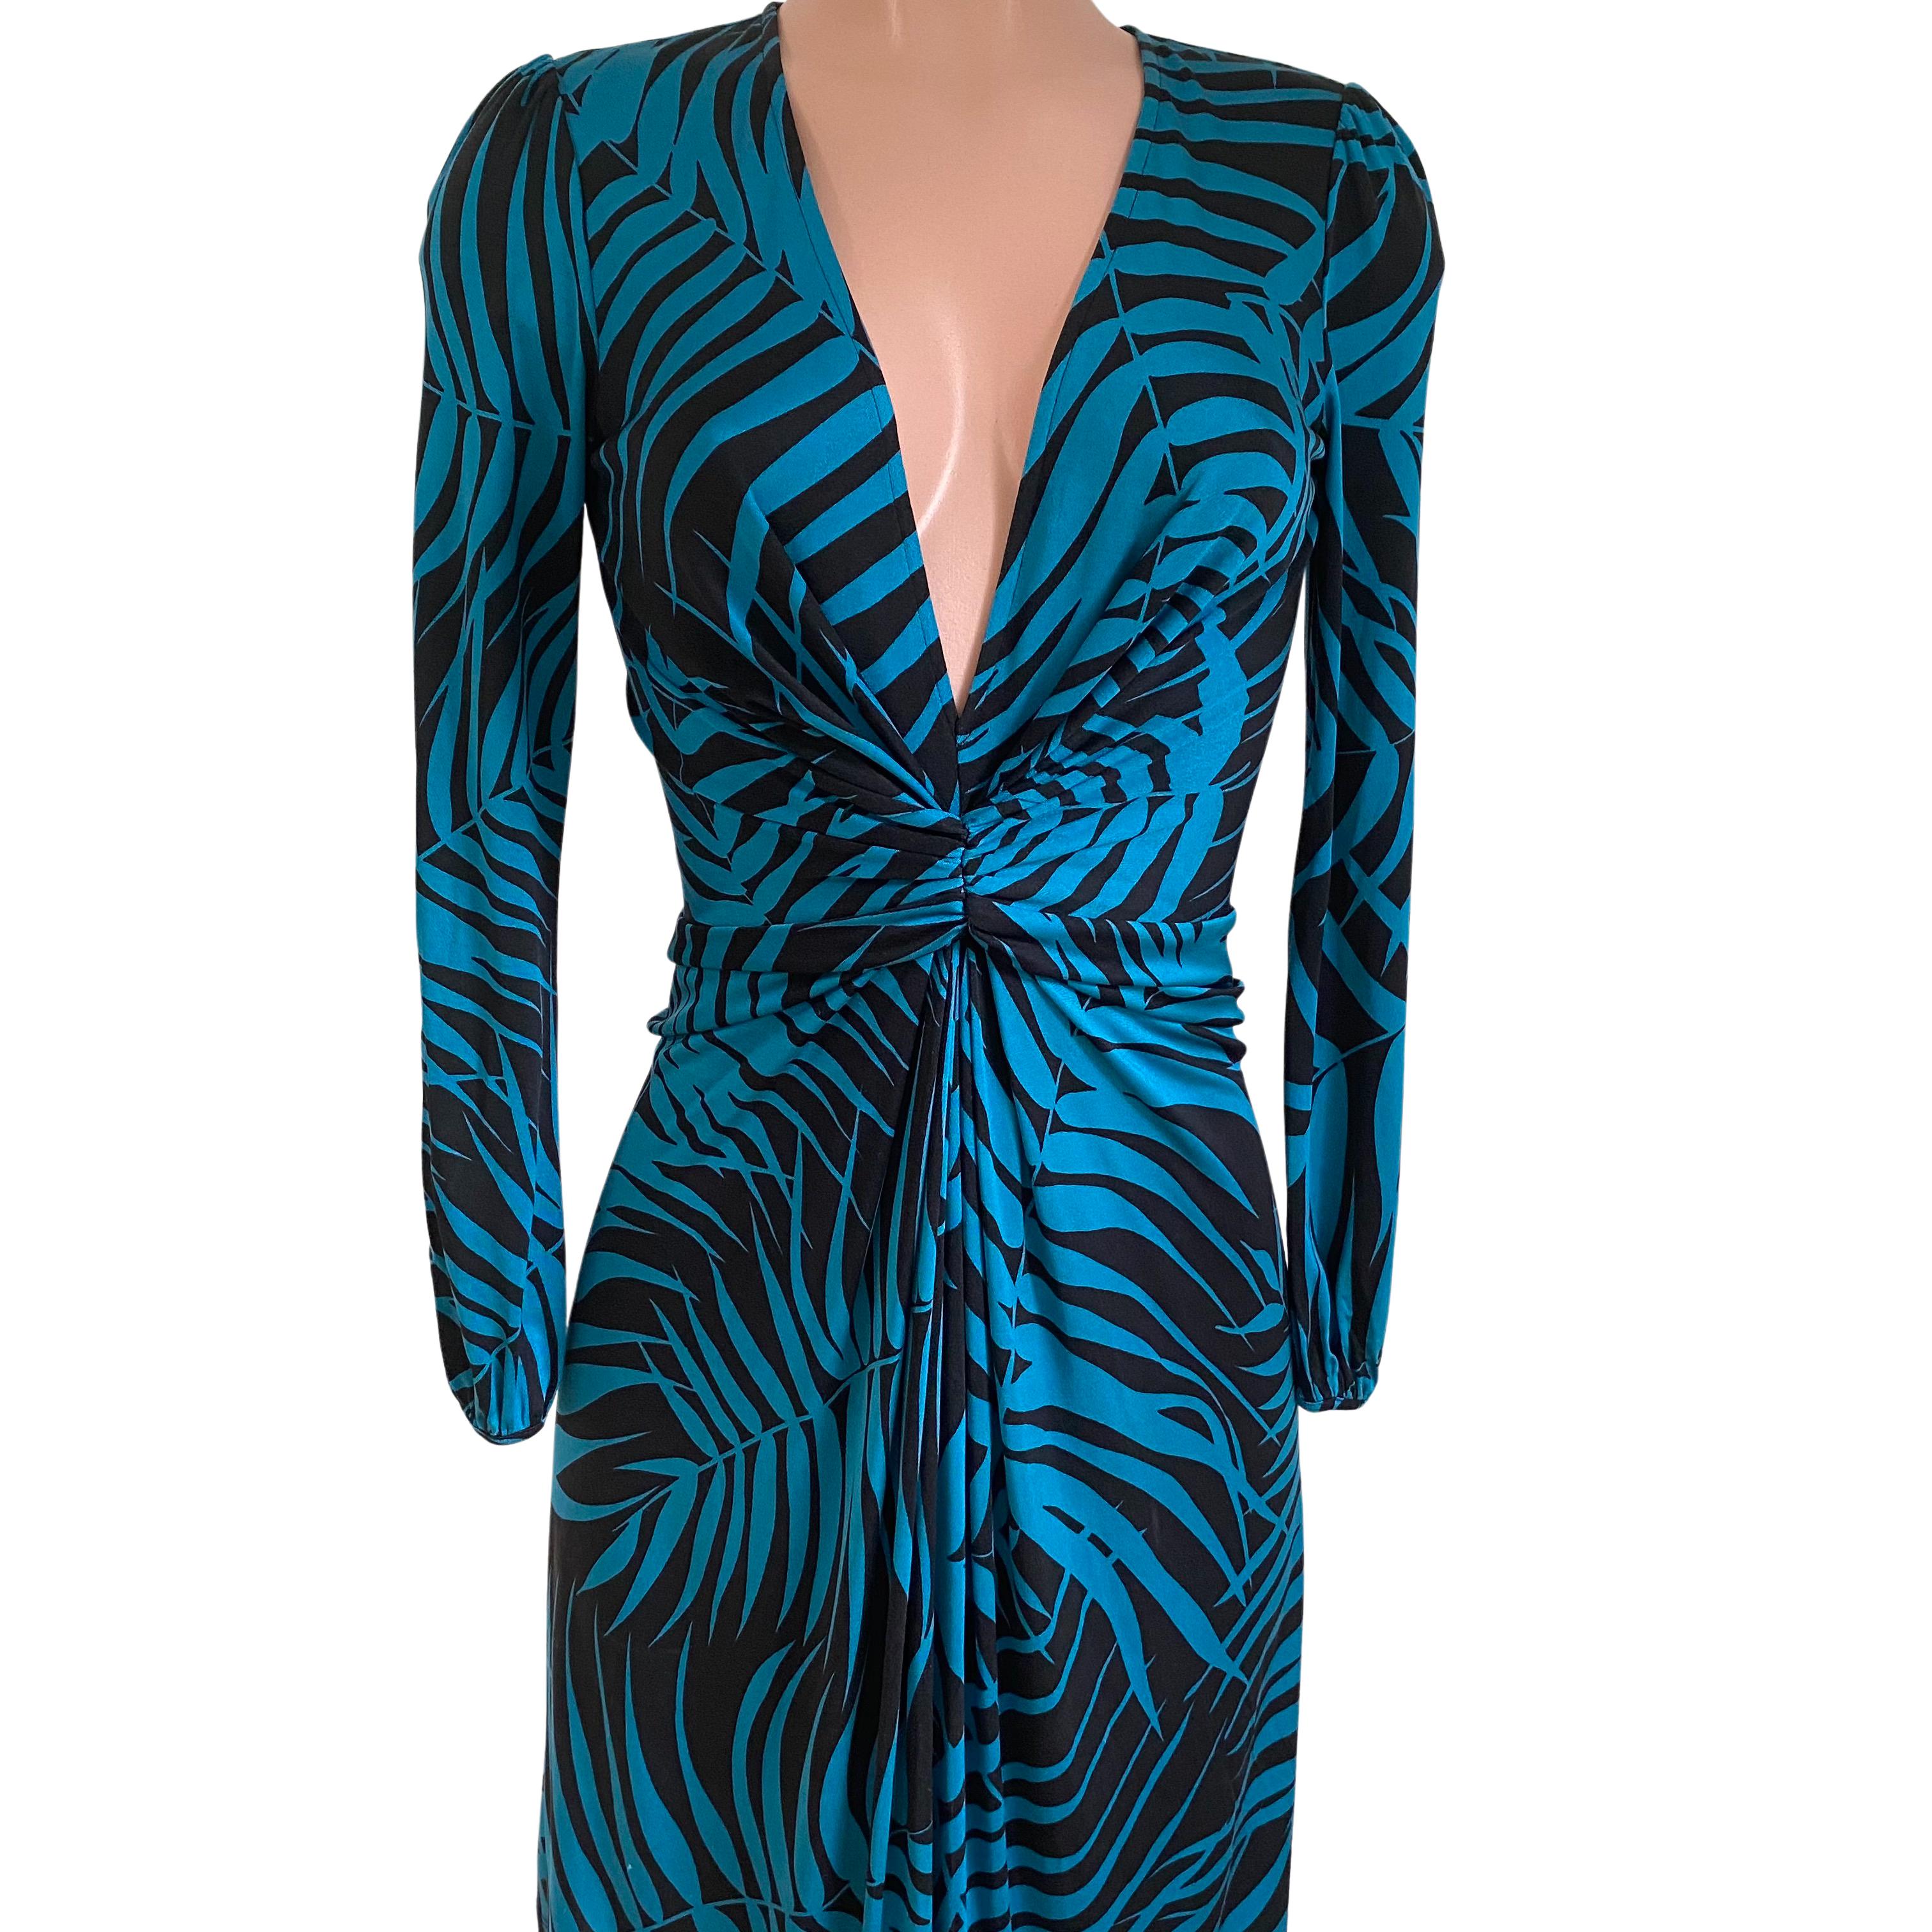 Flattering and classy dress with deep plunge V-neck. 
In original fern print in peacock blue and black.
Invisible back zipper for easy entry, slightly flared skirt with hidden pleat at front.
Approximately 41